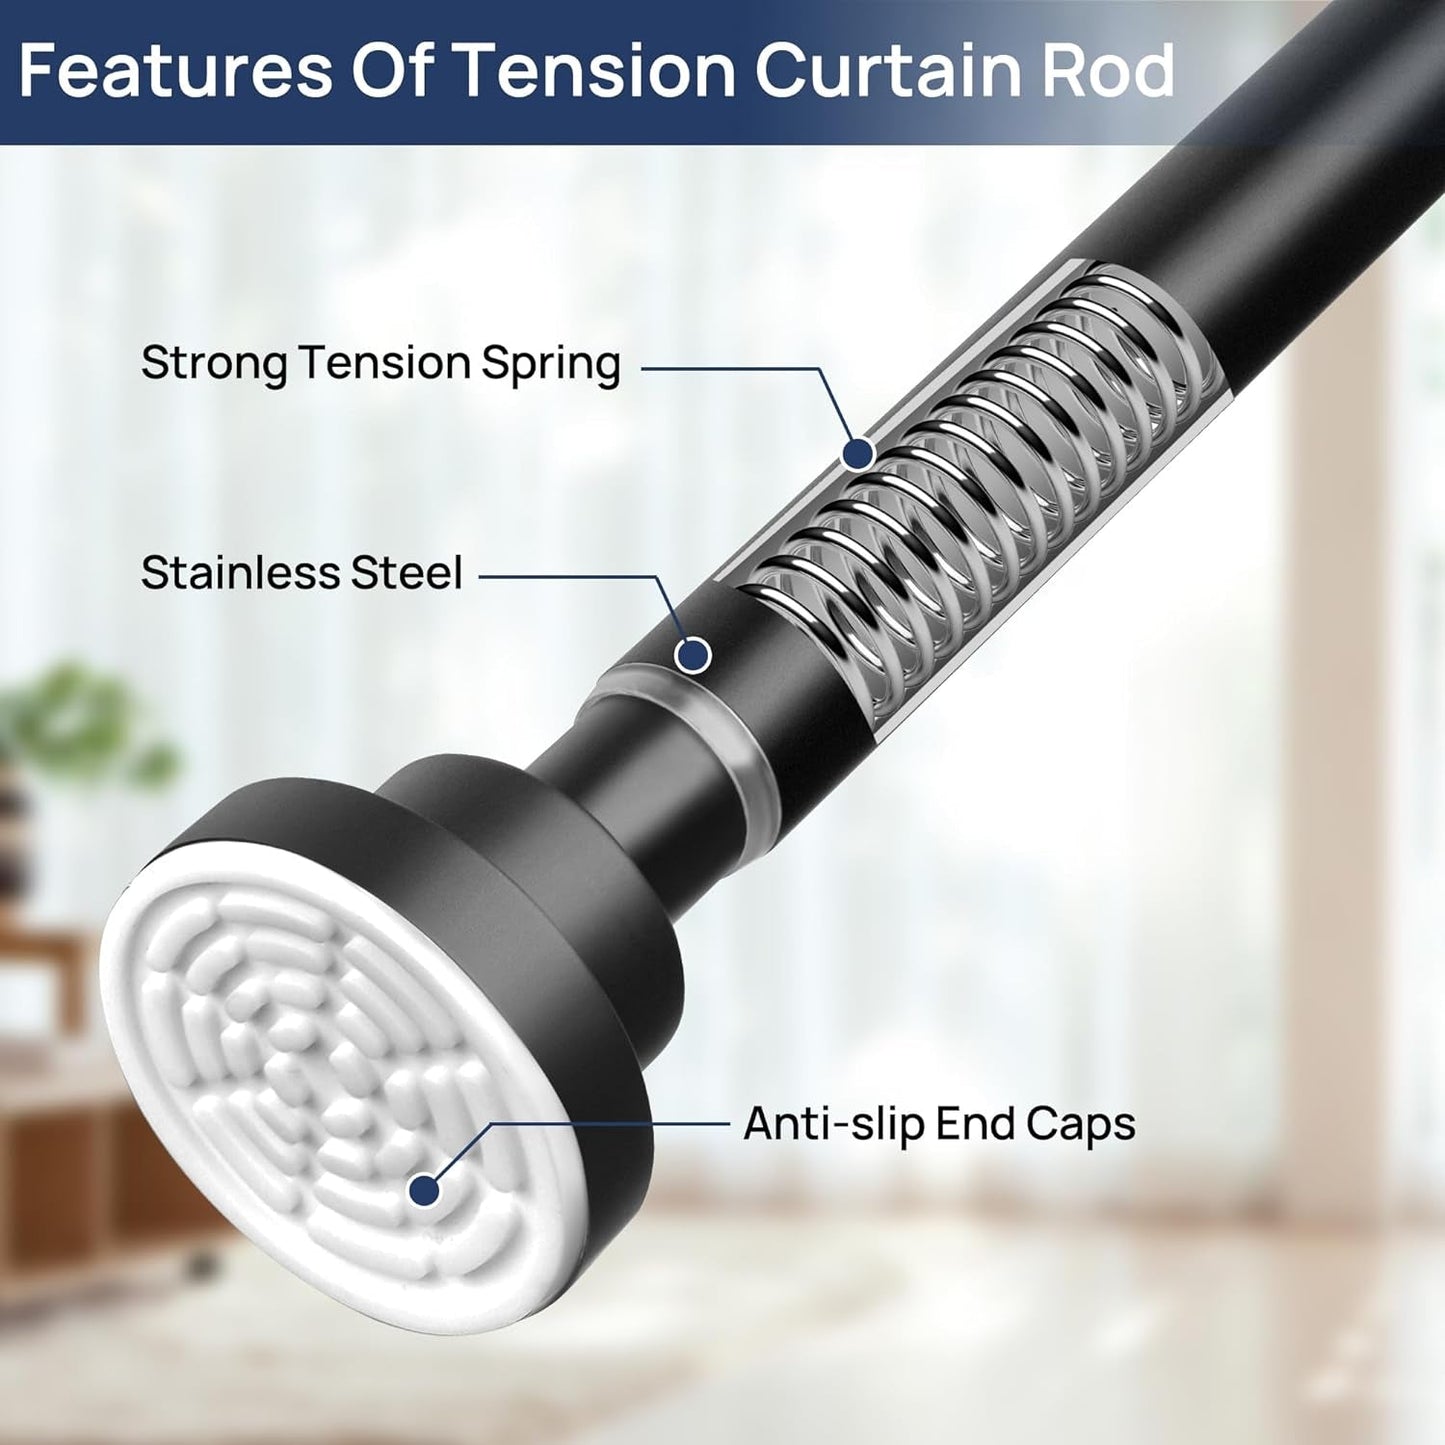 ENJOYBASICS Adjustable Spring Tension Curtain Rod 32 to 66 Inches, Stainless Steel Matte Black Shower Rod No Drilling, 7/8" Tension Rod for Window, Bathroom, Closet, Room Divider, 1 Pack